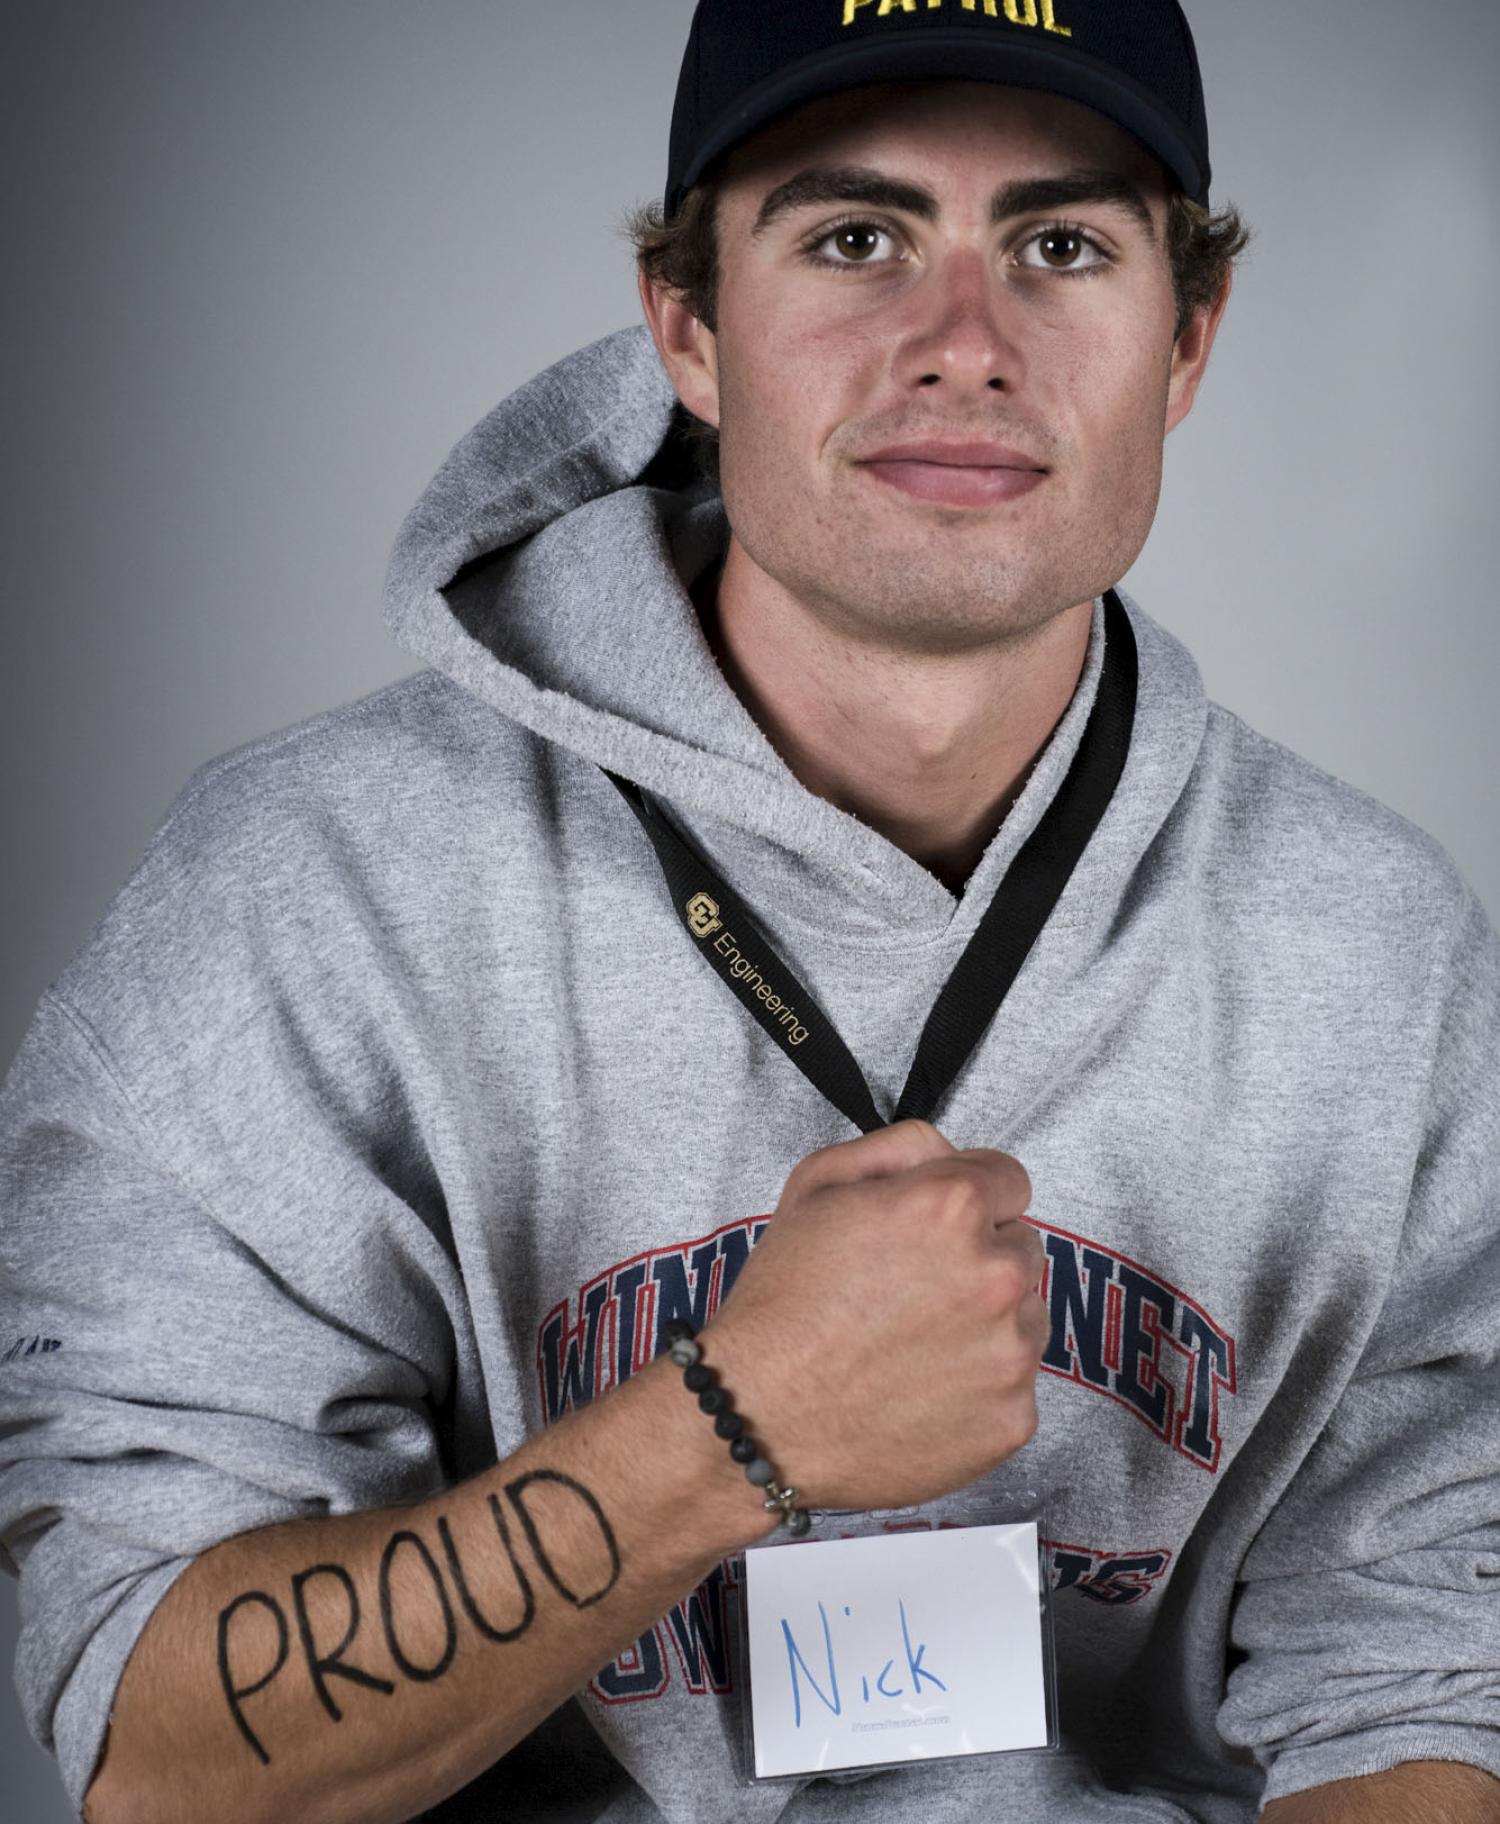 Male student with writing on arm